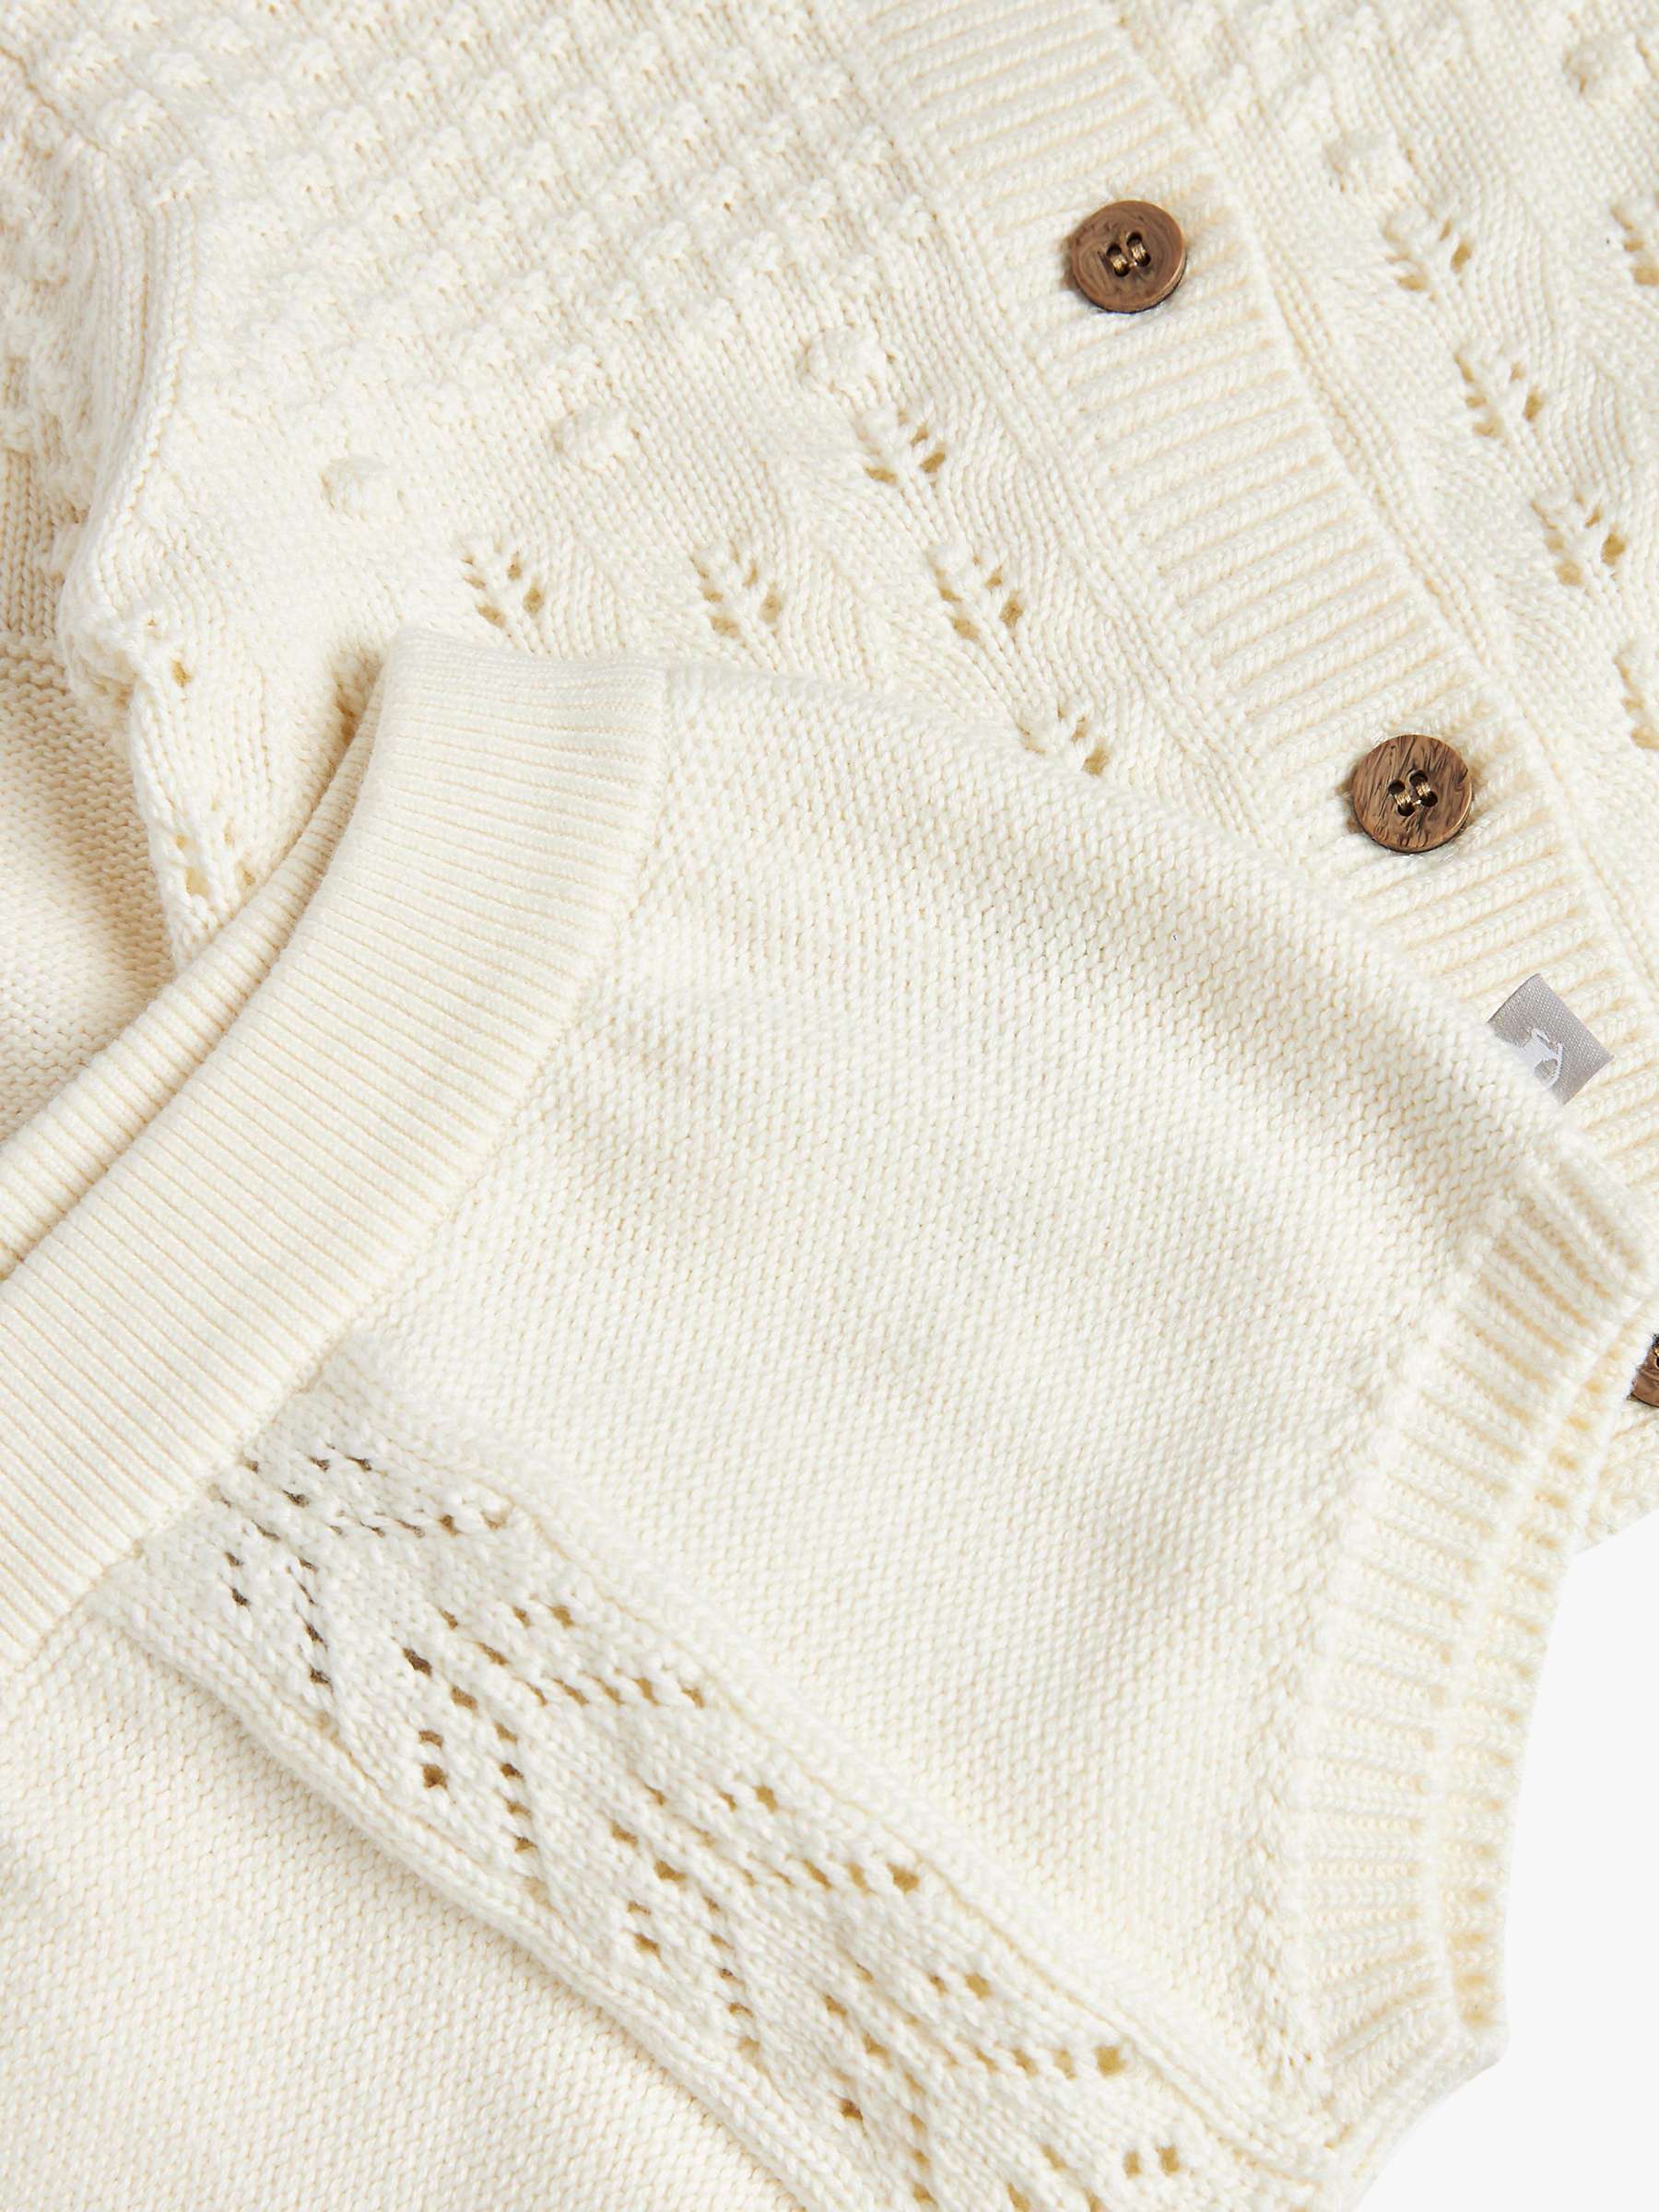 Buy The Little Tailor Baby Three Piece Cardigan, Bloomer & Bonnet Set Online at johnlewis.com